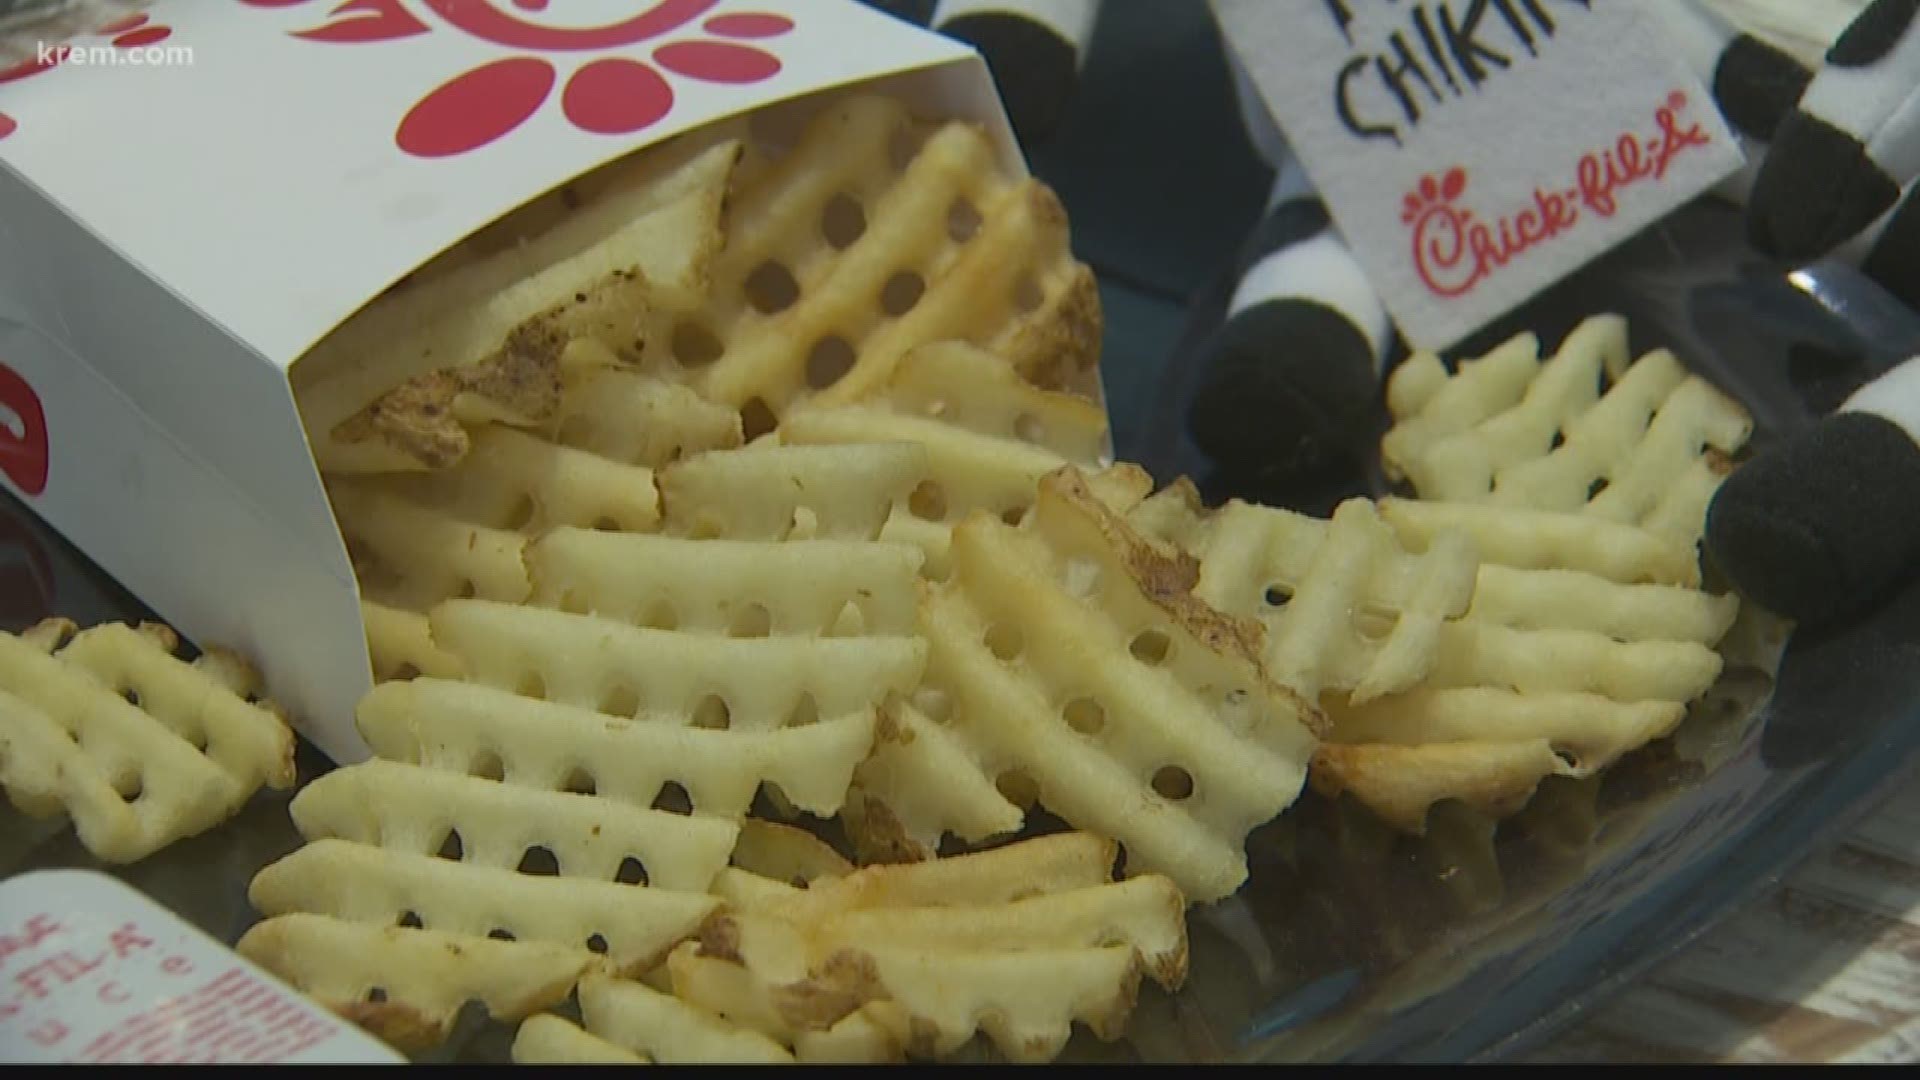 Hopes of a Chick-fil-A in Spokane have been rekindled. The location could open at 9304 N. Newport Highway.